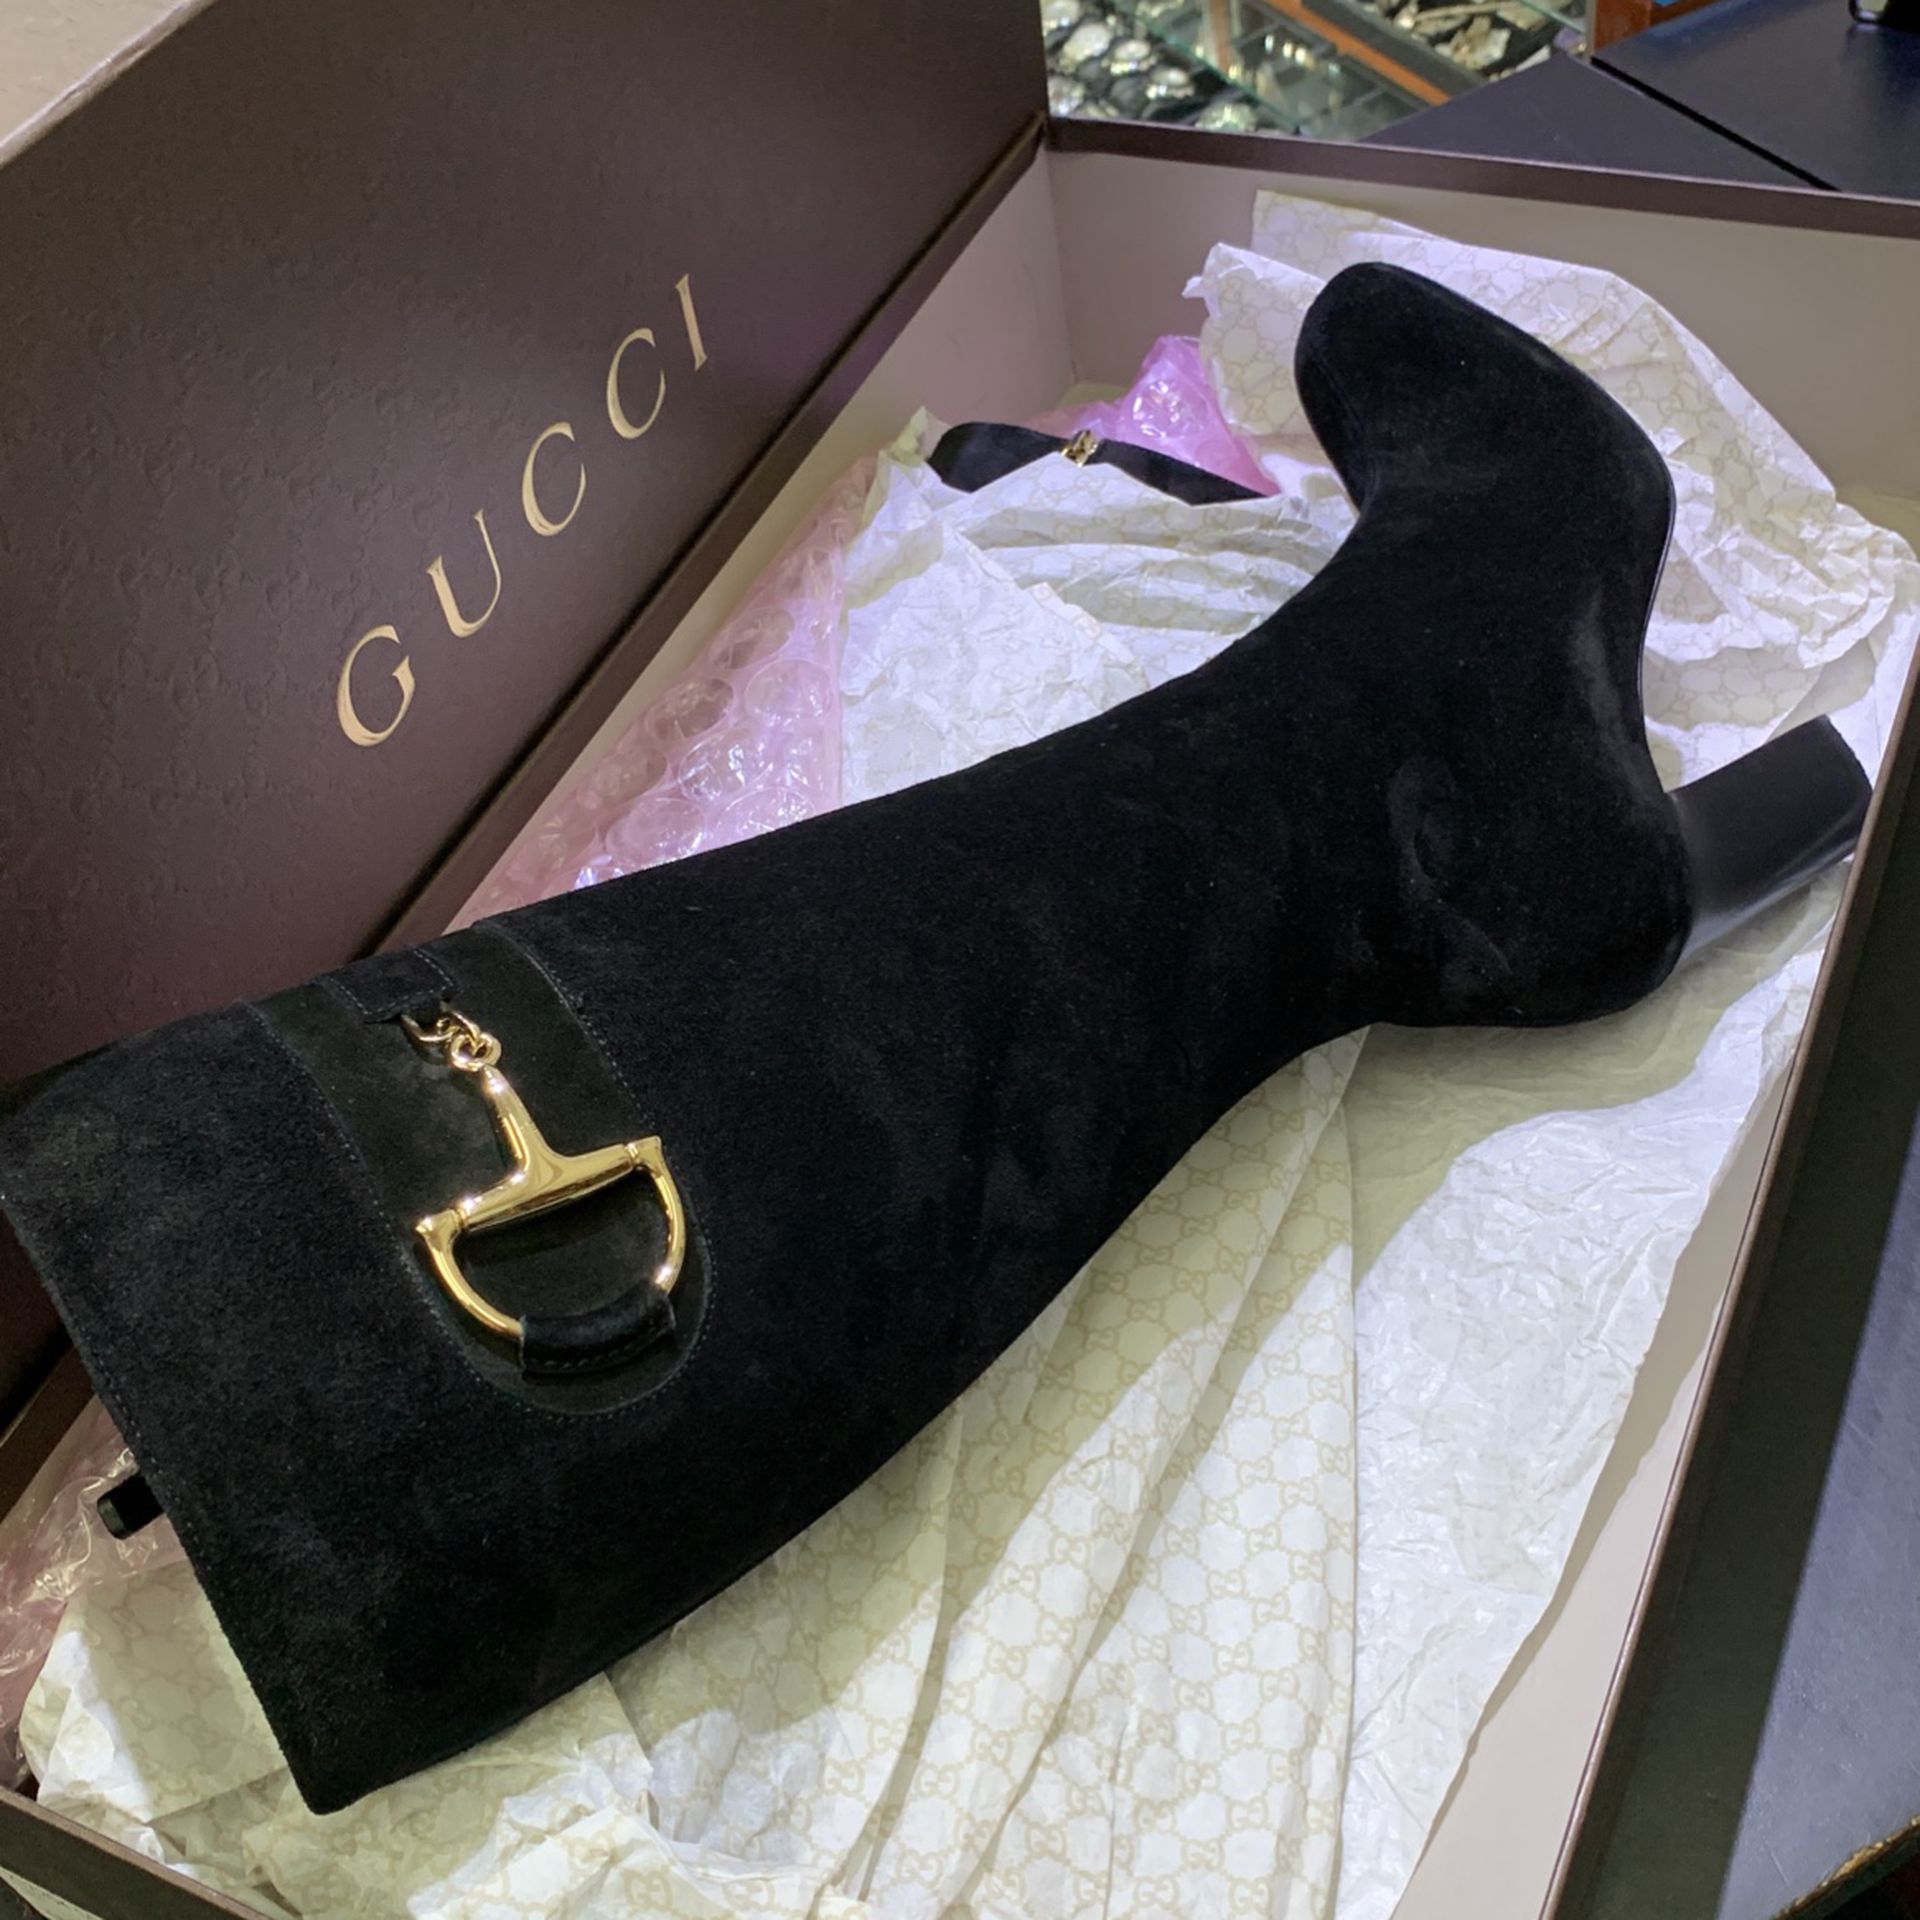 Gucci Women’s Suede Boots Sz 38C/7US, Box, Nice!